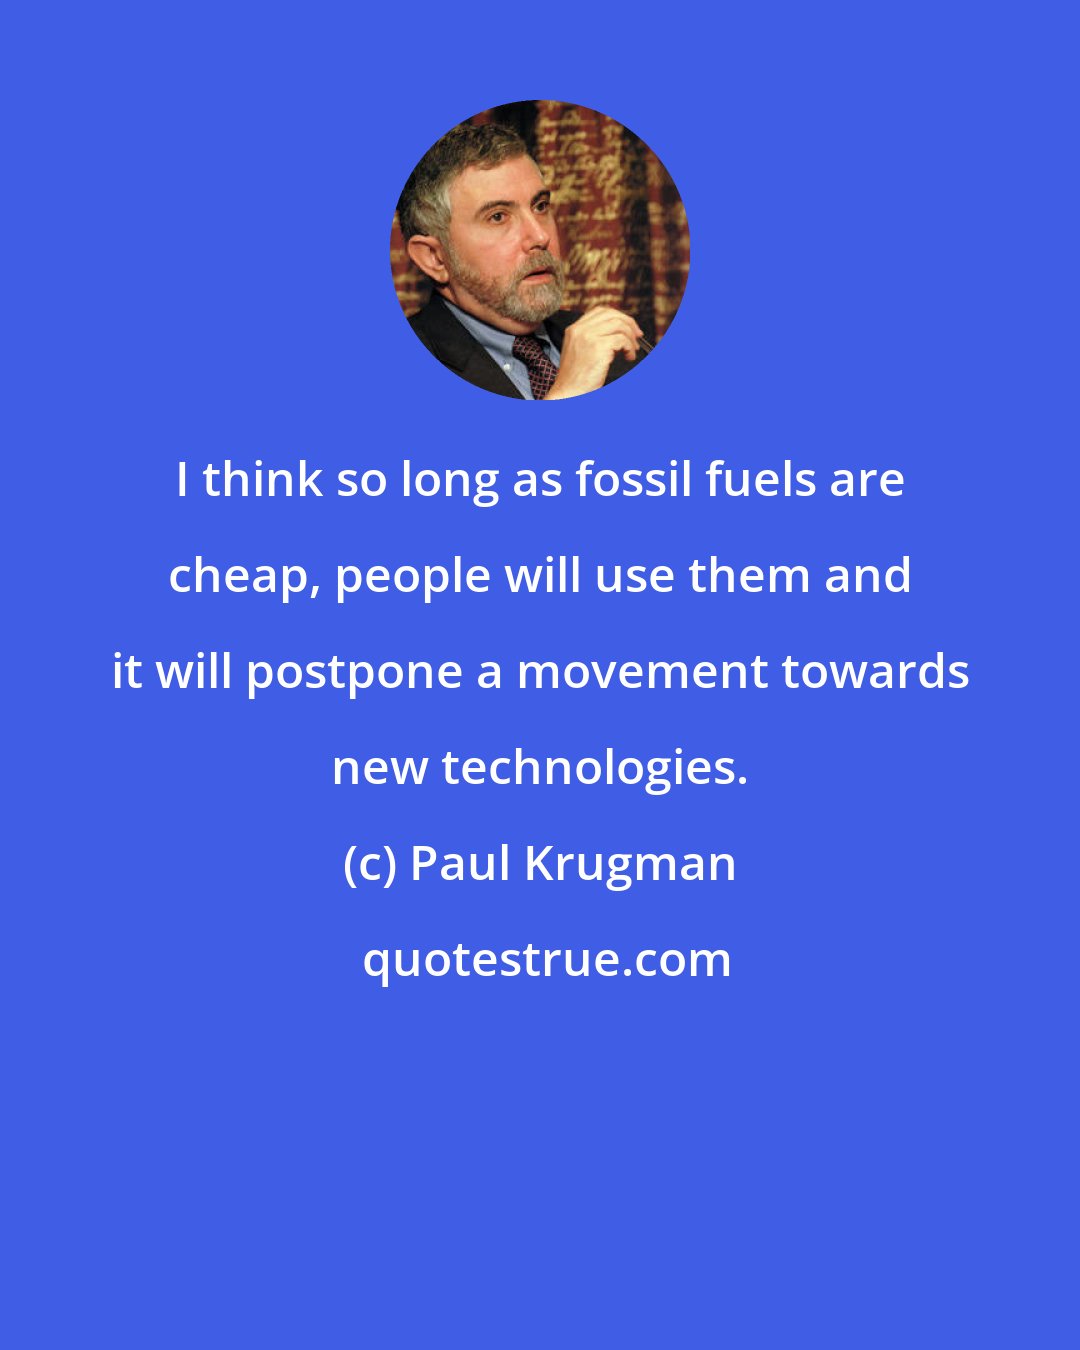 Paul Krugman: I think so long as fossil fuels are cheap, people will use them and it will postpone a movement towards new technologies.